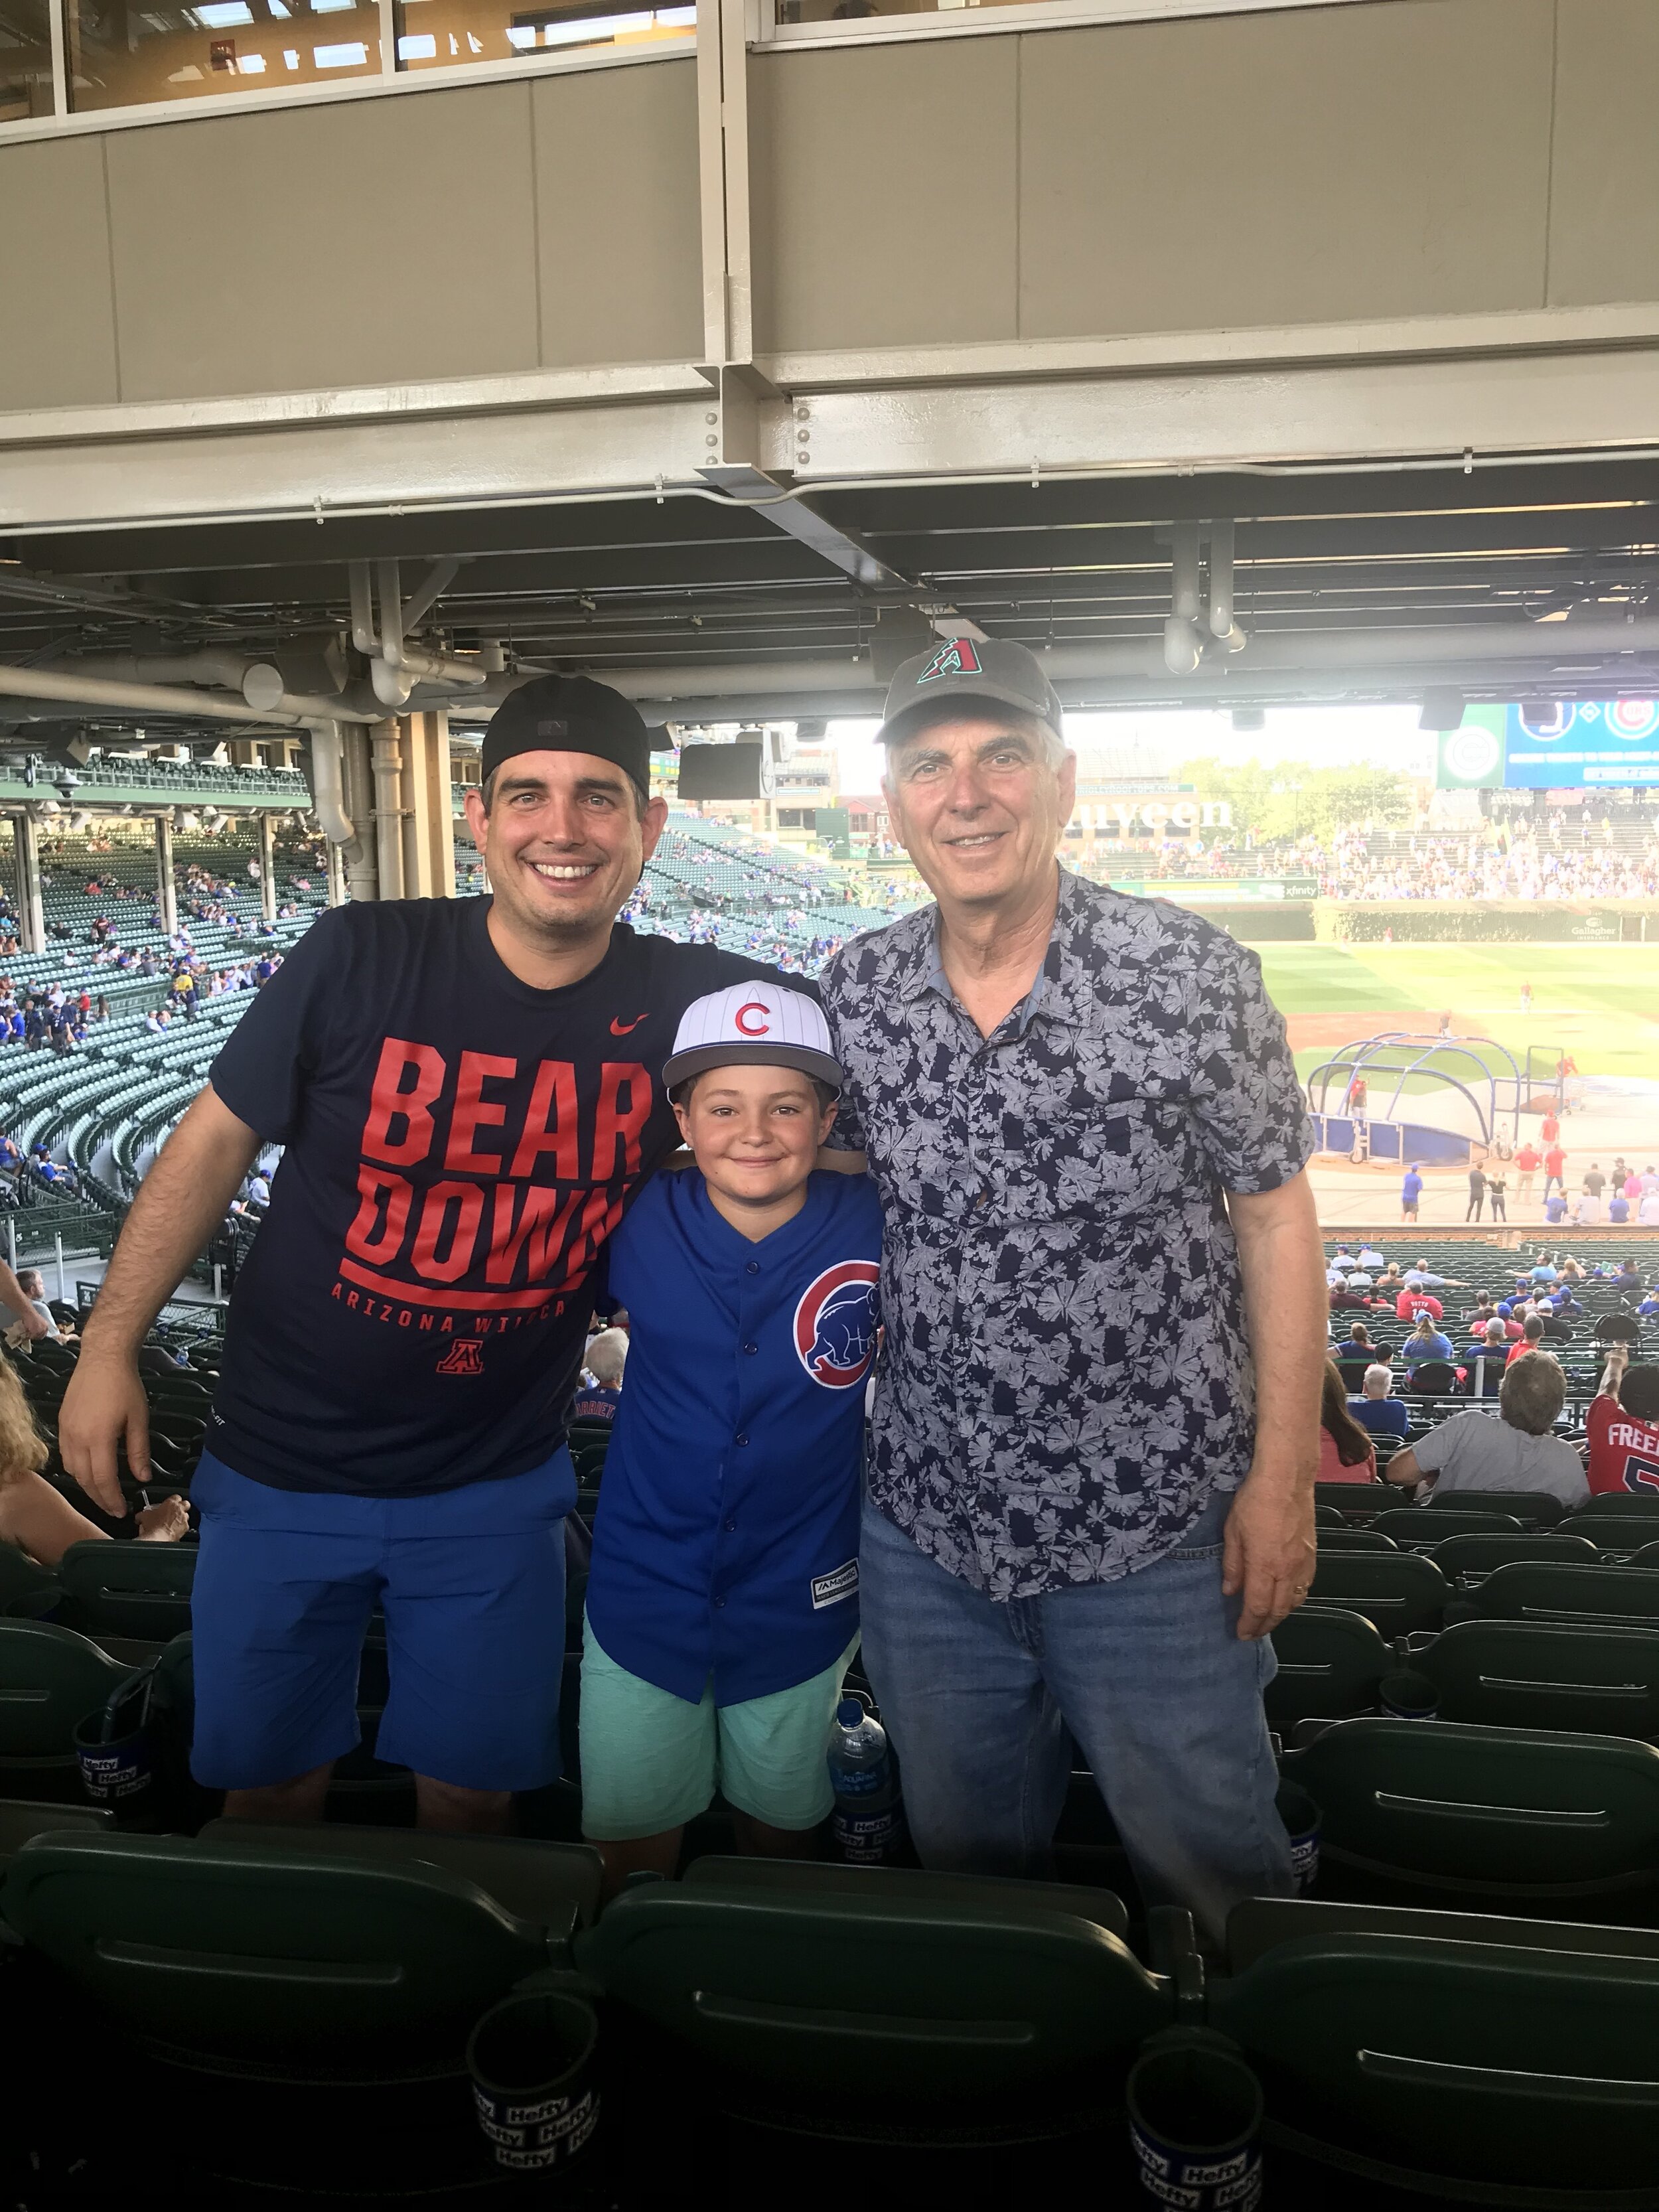 Ollie, Braden and I at Wrigley Field - Chicago, home of the Cubs